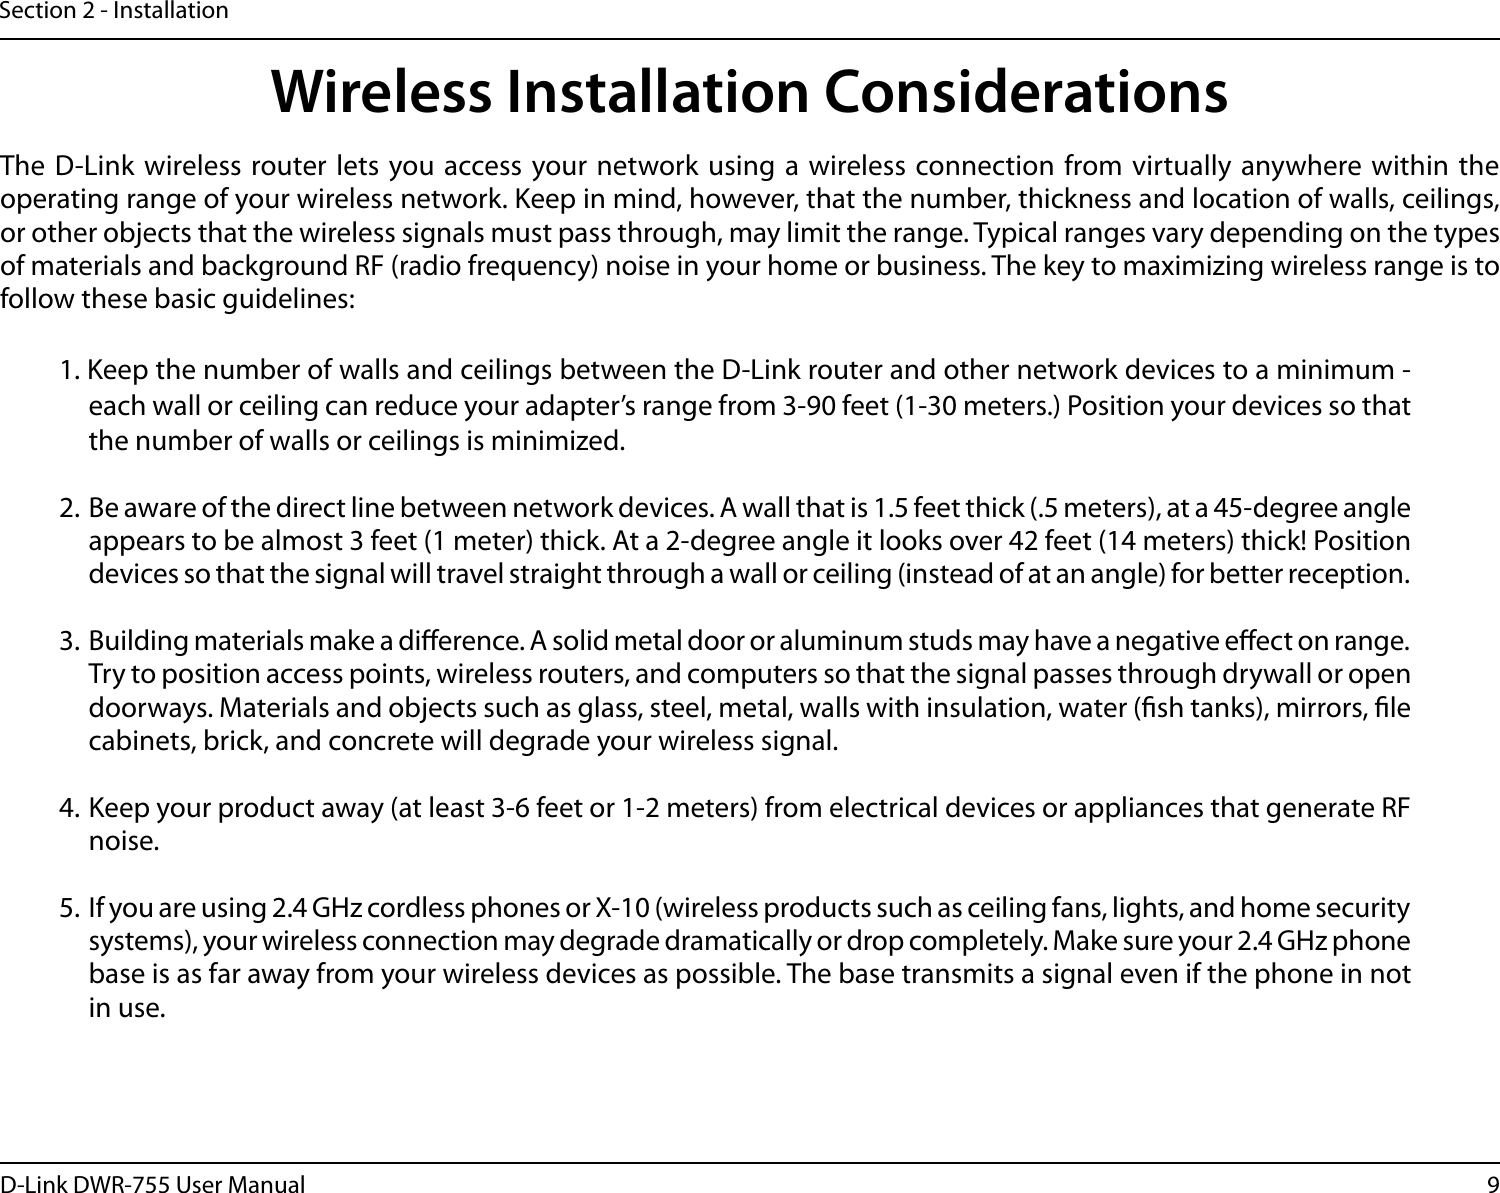 9D-Link DWR-755 User ManualSection 2 - InstallationWireless Installation ConsiderationsThe D-Link wireless router lets you access your network using a wireless connection from virtually anywhere within the operating range of your wireless network. Keep in mind, however, that the number, thickness and location of walls, ceilings, or other objects that the wireless signals must pass through, may limit the range. Typical ranges vary depending on the types of materials and background RF (radio frequency) noise in your home or business. The key to maximizing wireless range is to follow these basic guidelines:1. Keep the number of walls and ceilings between the D-Link router and other network devices to a minimum - each wall or ceiling can reduce your adapter’s range from 3-90 feet (1-30 meters.) Position your devices so that the number of walls or ceilings is minimized.2.  Be aware of the direct line between network devices. A wall that is 1.5 feet thick (.5 meters), at a 45-degree angle appears to be almost 3 feet (1 meter) thick. At a 2-degree angle it looks over 42 feet (14 meters) thick! Position devices so that the signal will travel straight through a wall or ceiling (instead of at an angle) for better reception.3.  Building materials make a dierence. A solid metal door or aluminum studs may have a negative eect on range. Try to position access points, wireless routers, and computers so that the signal passes through drywall or open doorways. Materials and objects such as glass, steel, metal, walls with insulation, water (sh tanks), mirrors, le cabinets, brick, and concrete will degrade your wireless signal.4. Keep your product away (at least 3-6 feet or 1-2 meters) from electrical devices or appliances that generate RF noise.5.  If you are using 2.4 GHz cordless phones or X-10 (wireless products such as ceiling fans, lights, and home security systems), your wireless connection may degrade dramatically or drop completely. Make sure your 2.4 GHz phone base is as far away from your wireless devices as possible. The base transmits a signal even if the phone in not in use.